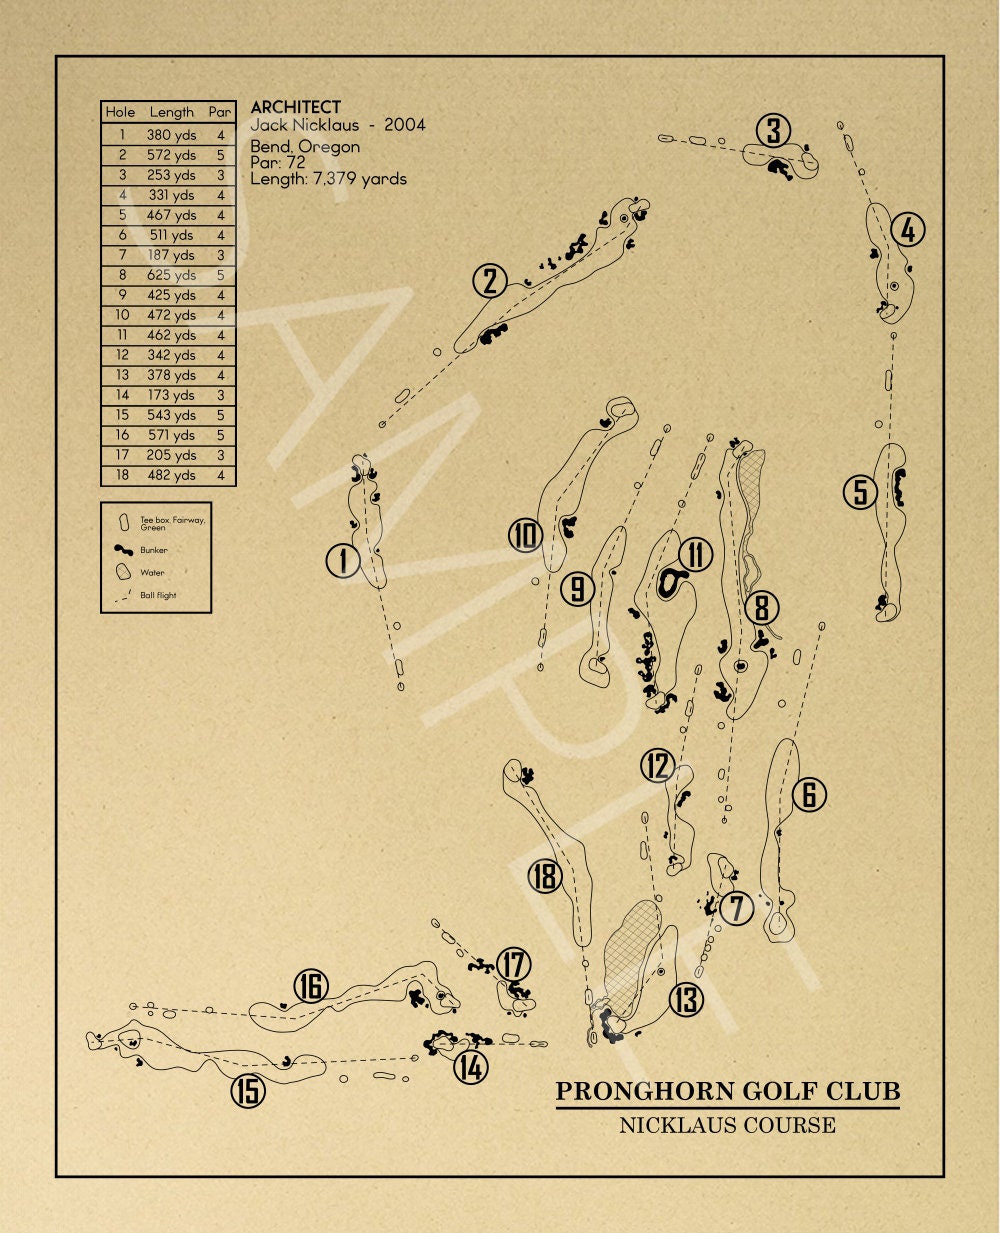 Pronghorn Golf Club Nicklaus Course Outline (Print)